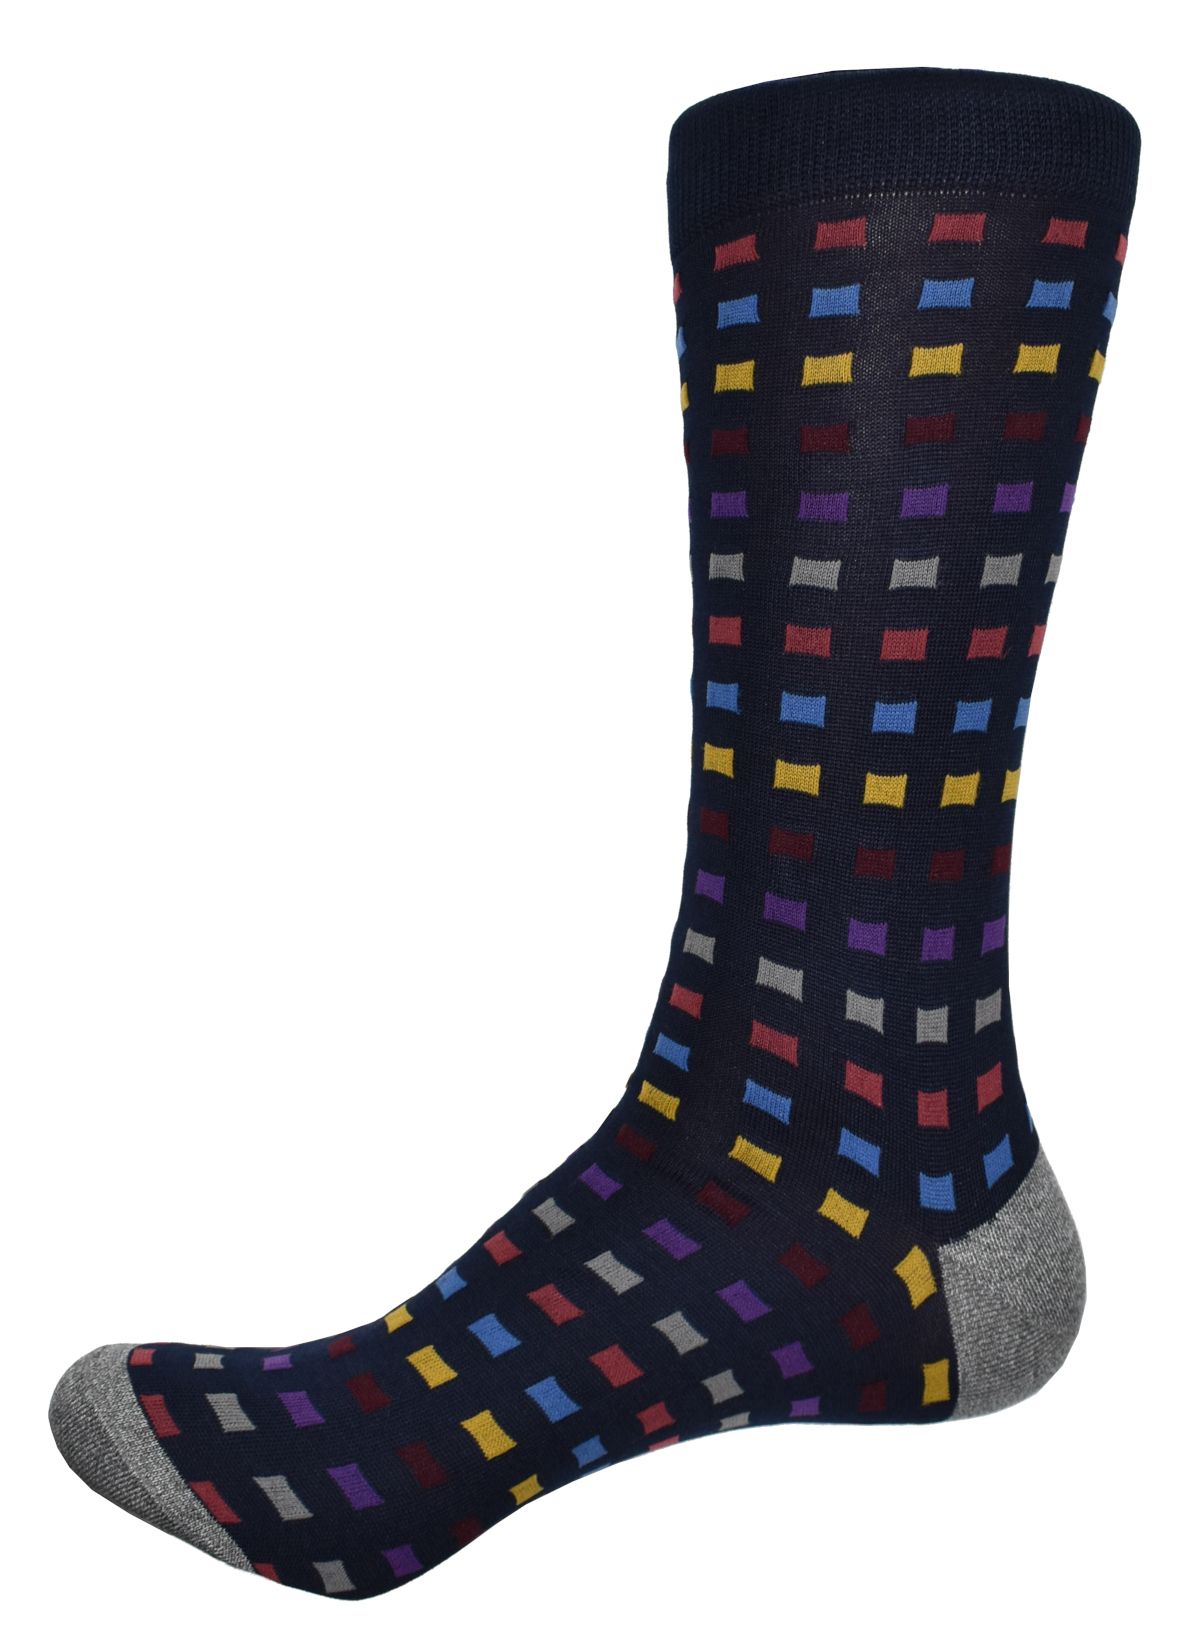 Exquisite Dion collection socks are knitted with extra fine mercerized cottons. The result is a rich feeling sock with crisp color depth.  Dark navy with multi colored boxes.  Mid to upper calf height.  Sizes 8-12.